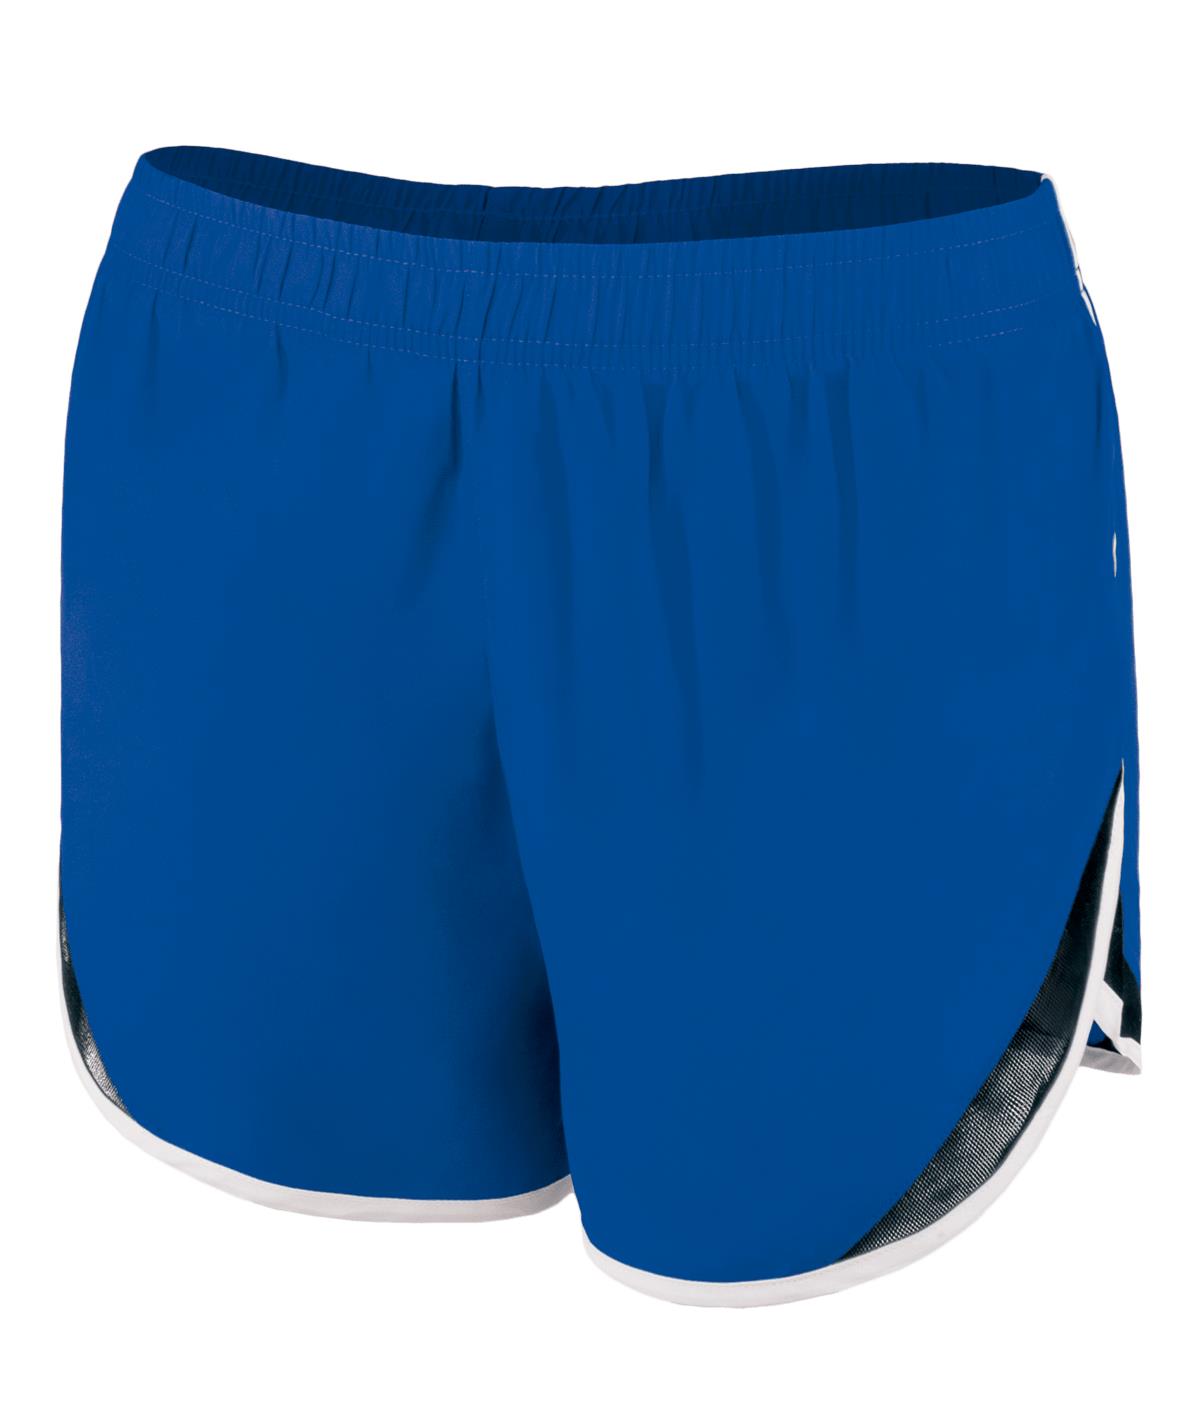 Chasse Cheer On Classic Gym Short